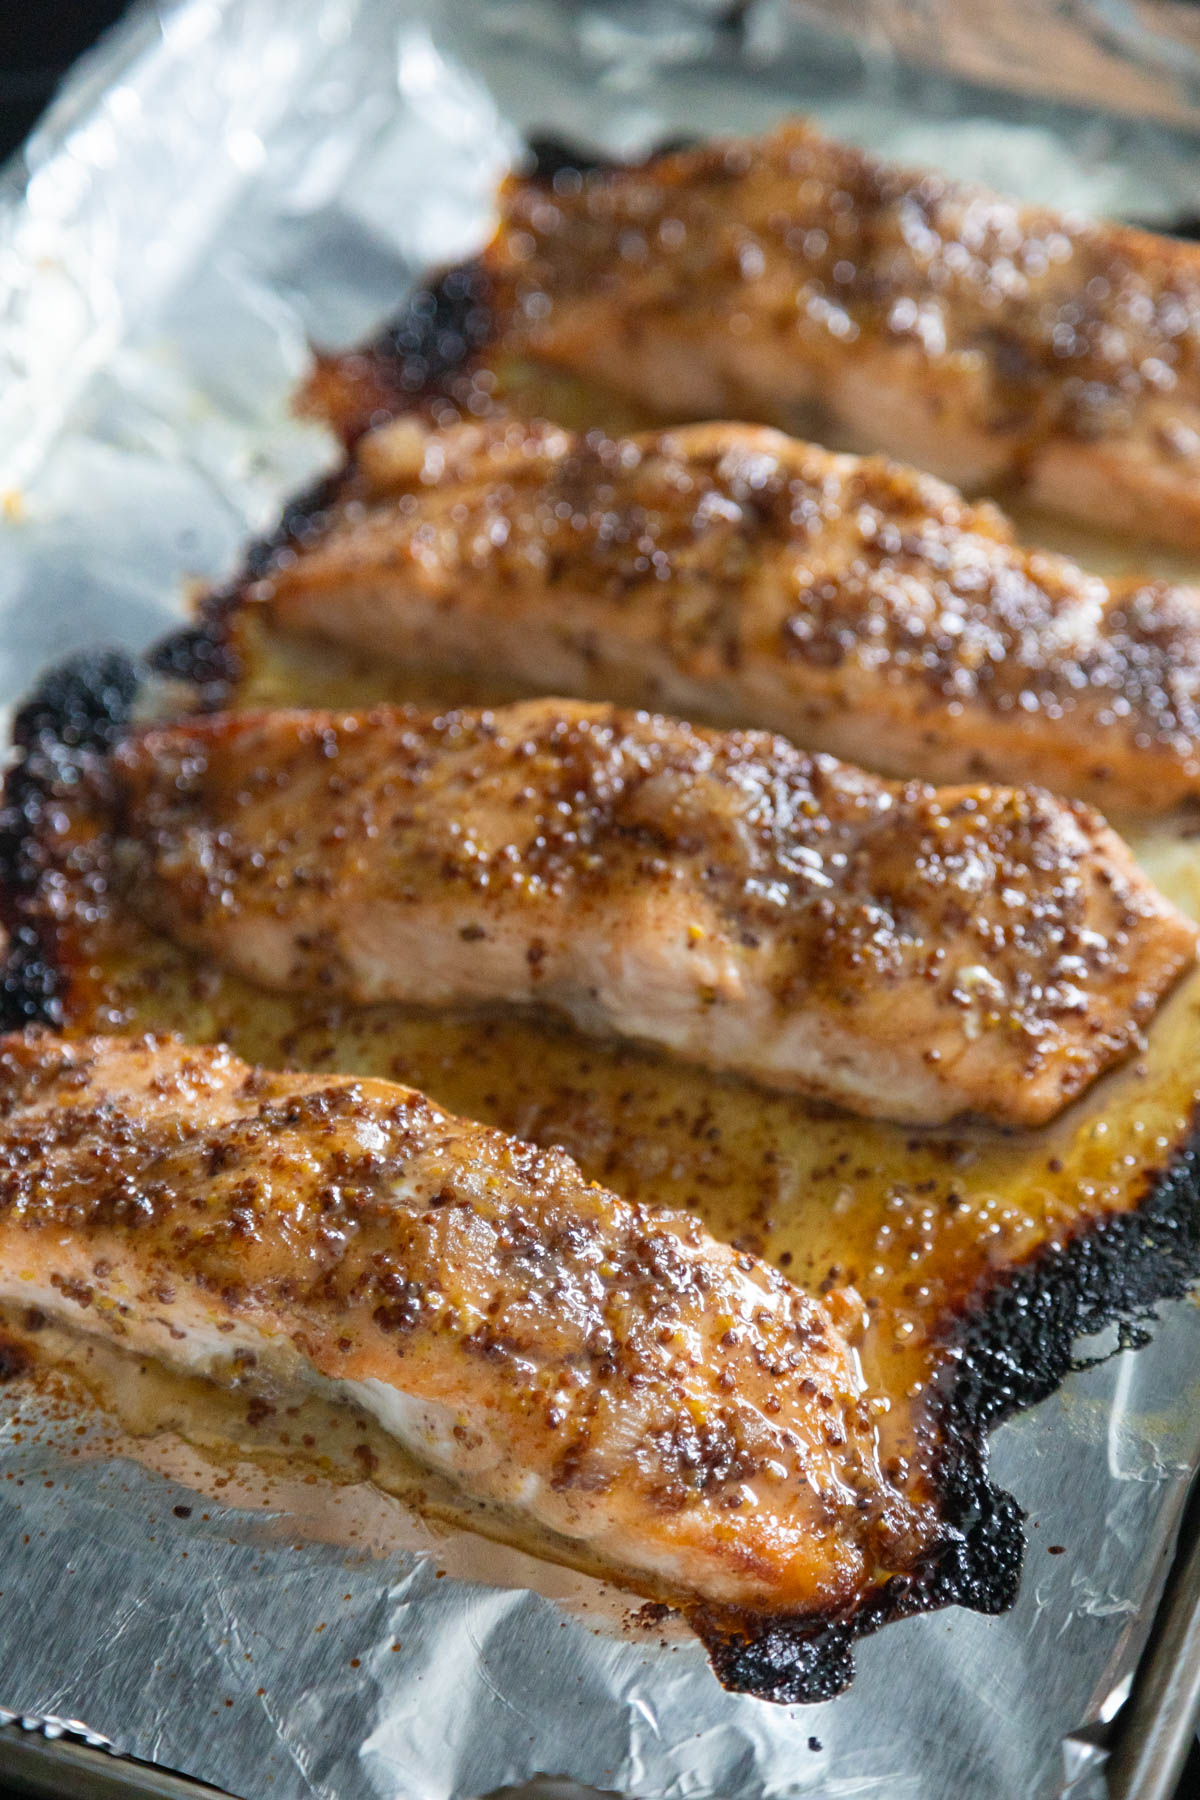 The broiled salmon is ready to be served. It is coated in a thick glaze with mustard seeds.